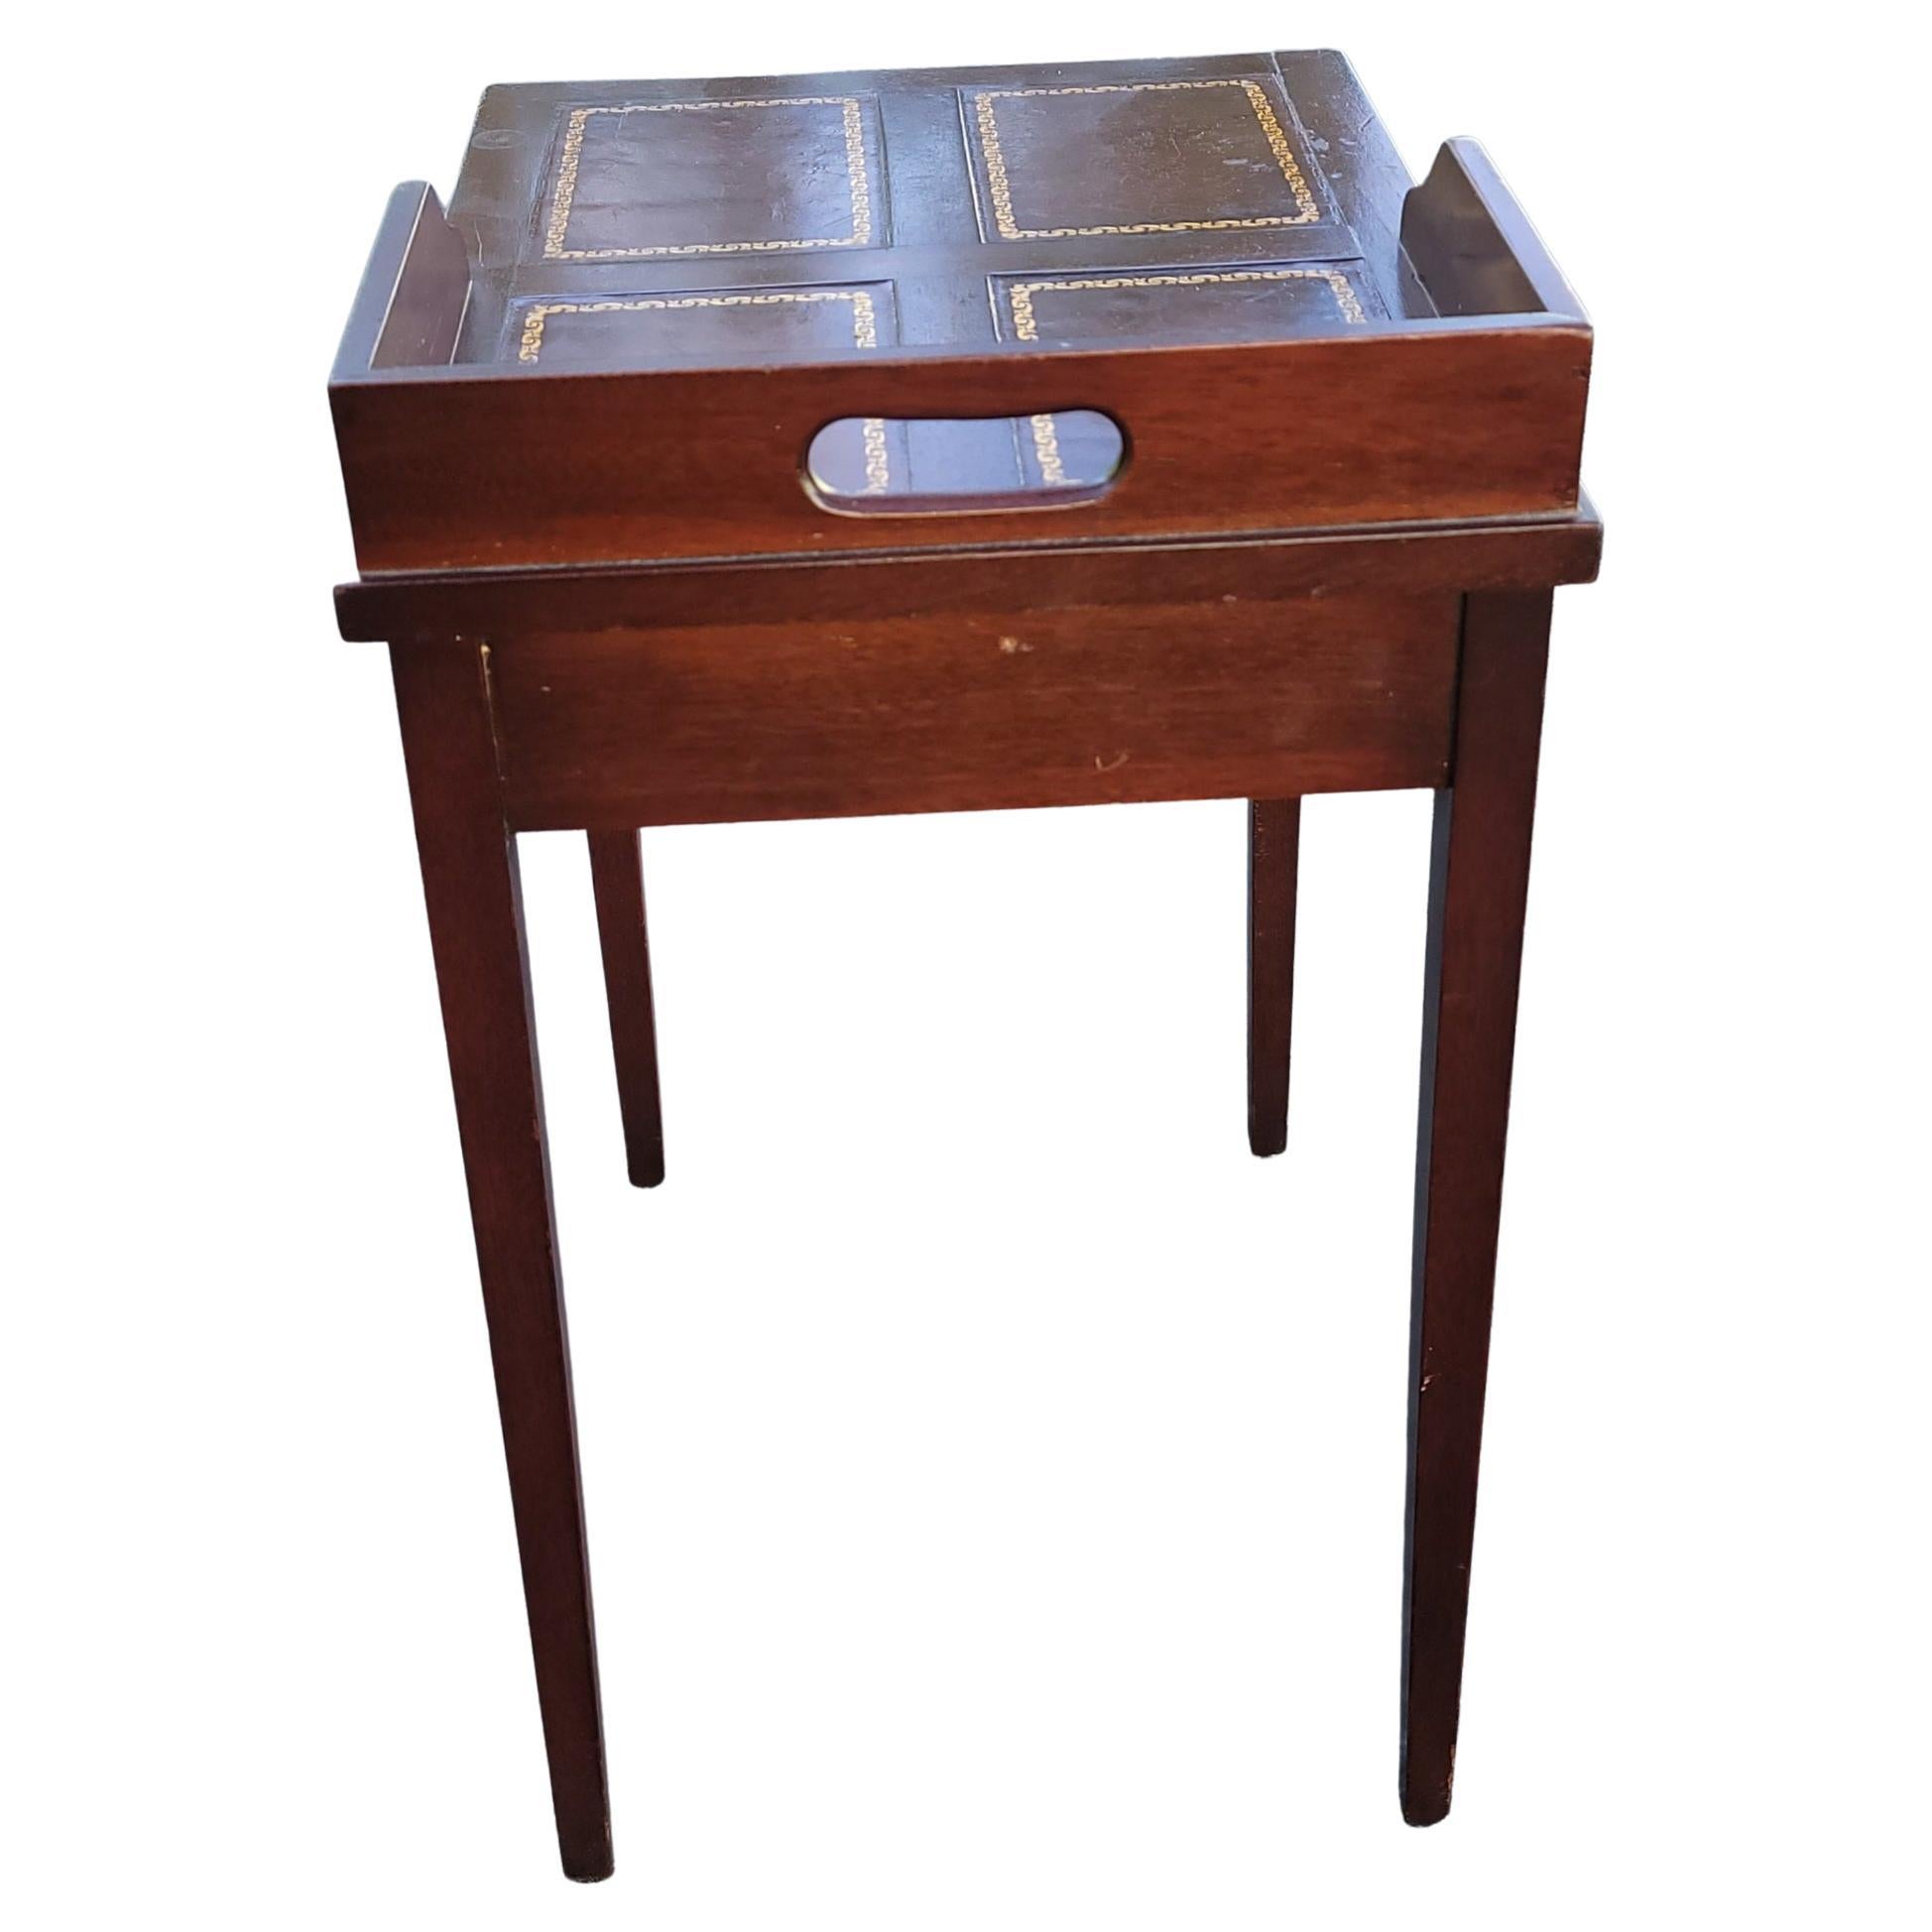 Mid-Century Mahogany Stinciled Leather Top Candle Stand Side Table In Good Condition For Sale In Germantown, MD